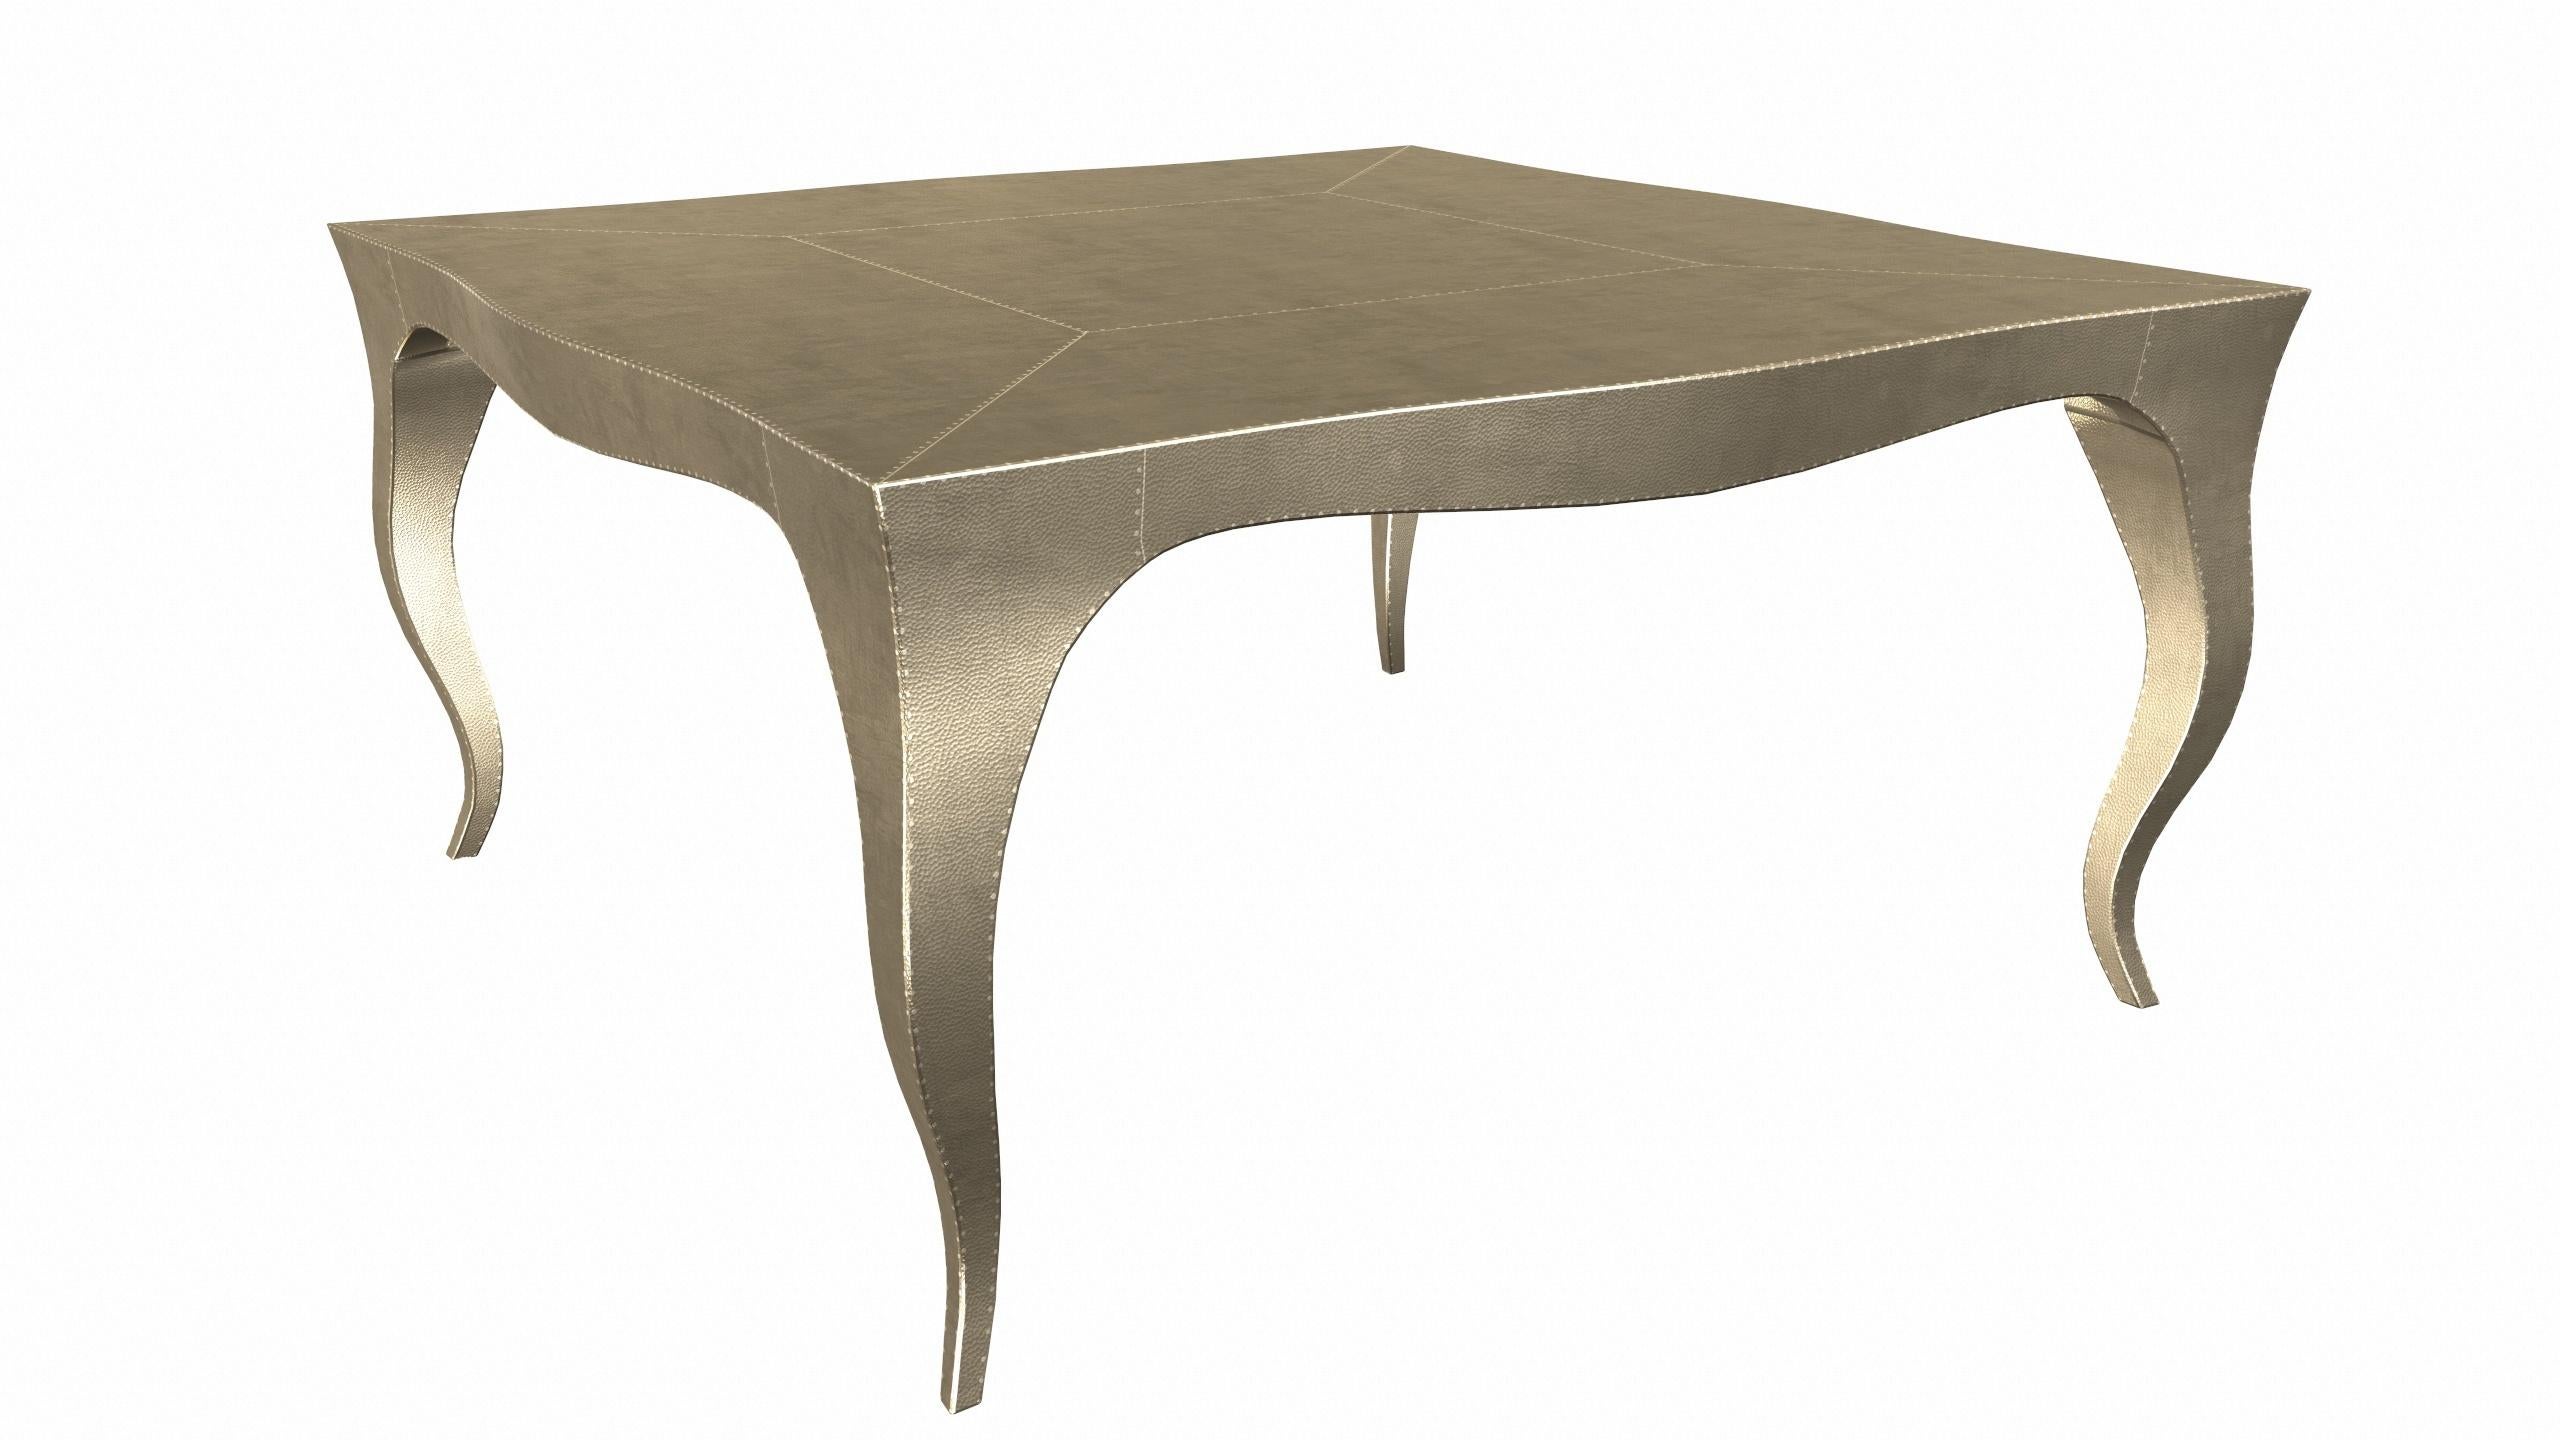 Metal Louise Art Deco Center Tables Mid. Hammered Brass by Paul Mathieu for S.Odegard For Sale